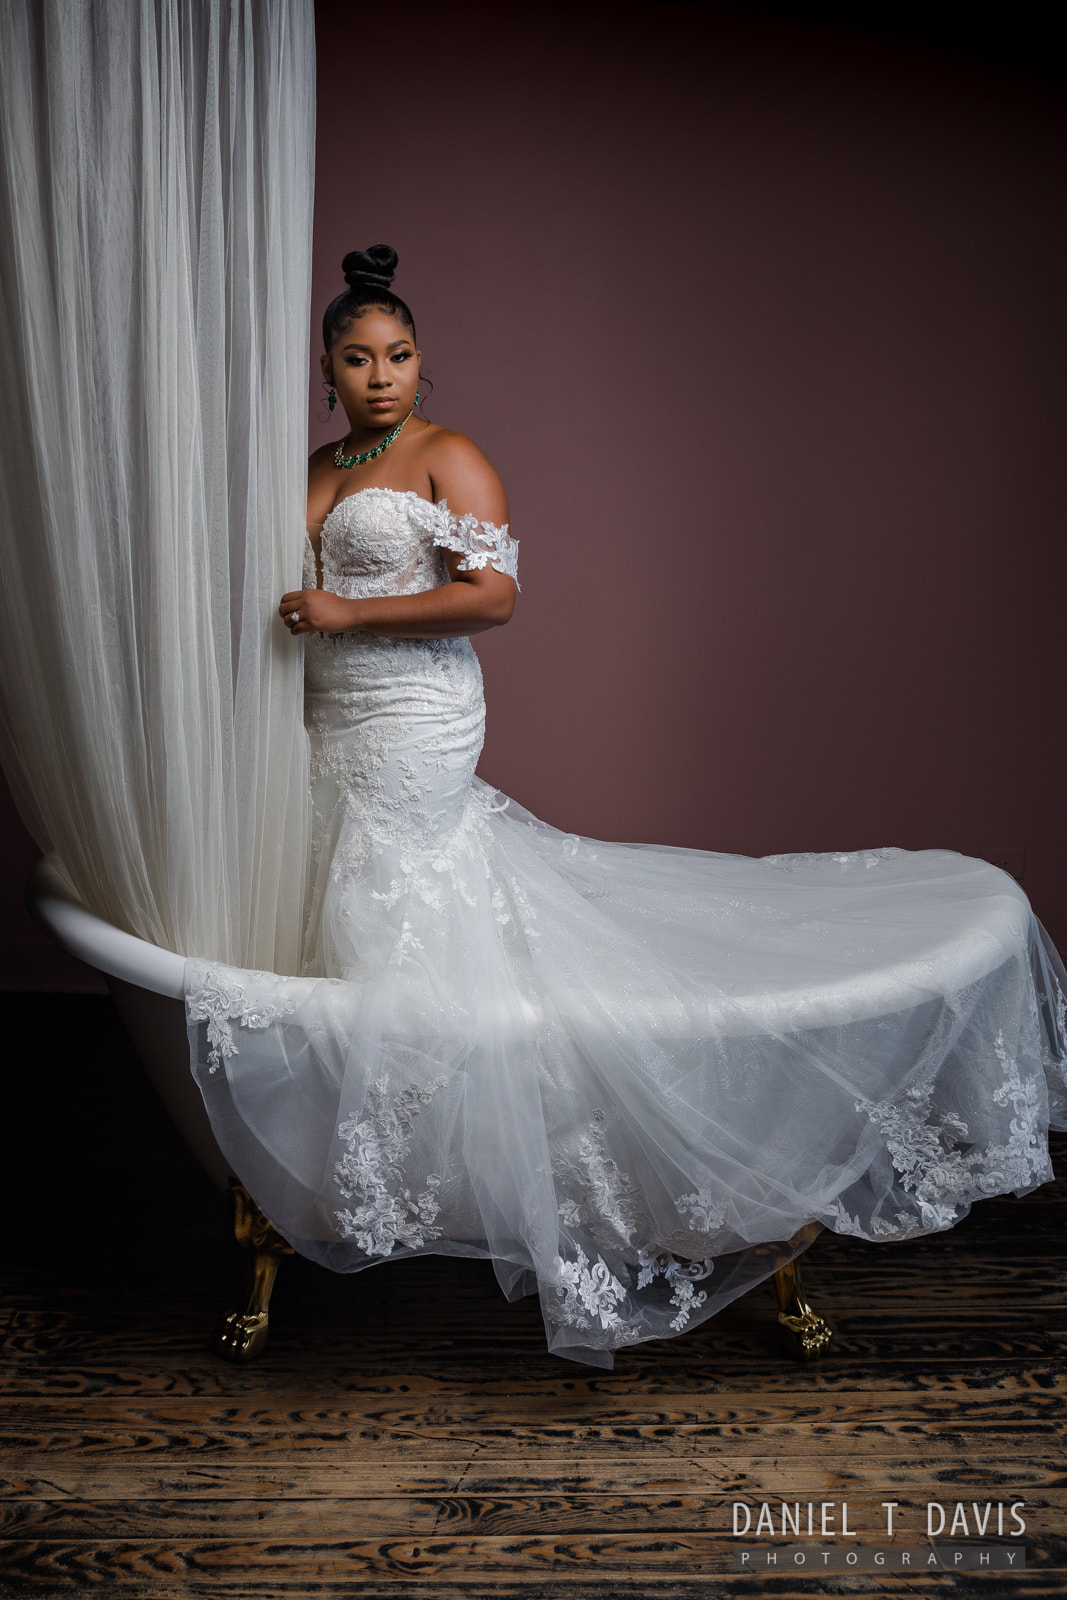 Bridal Session Locations in Houston